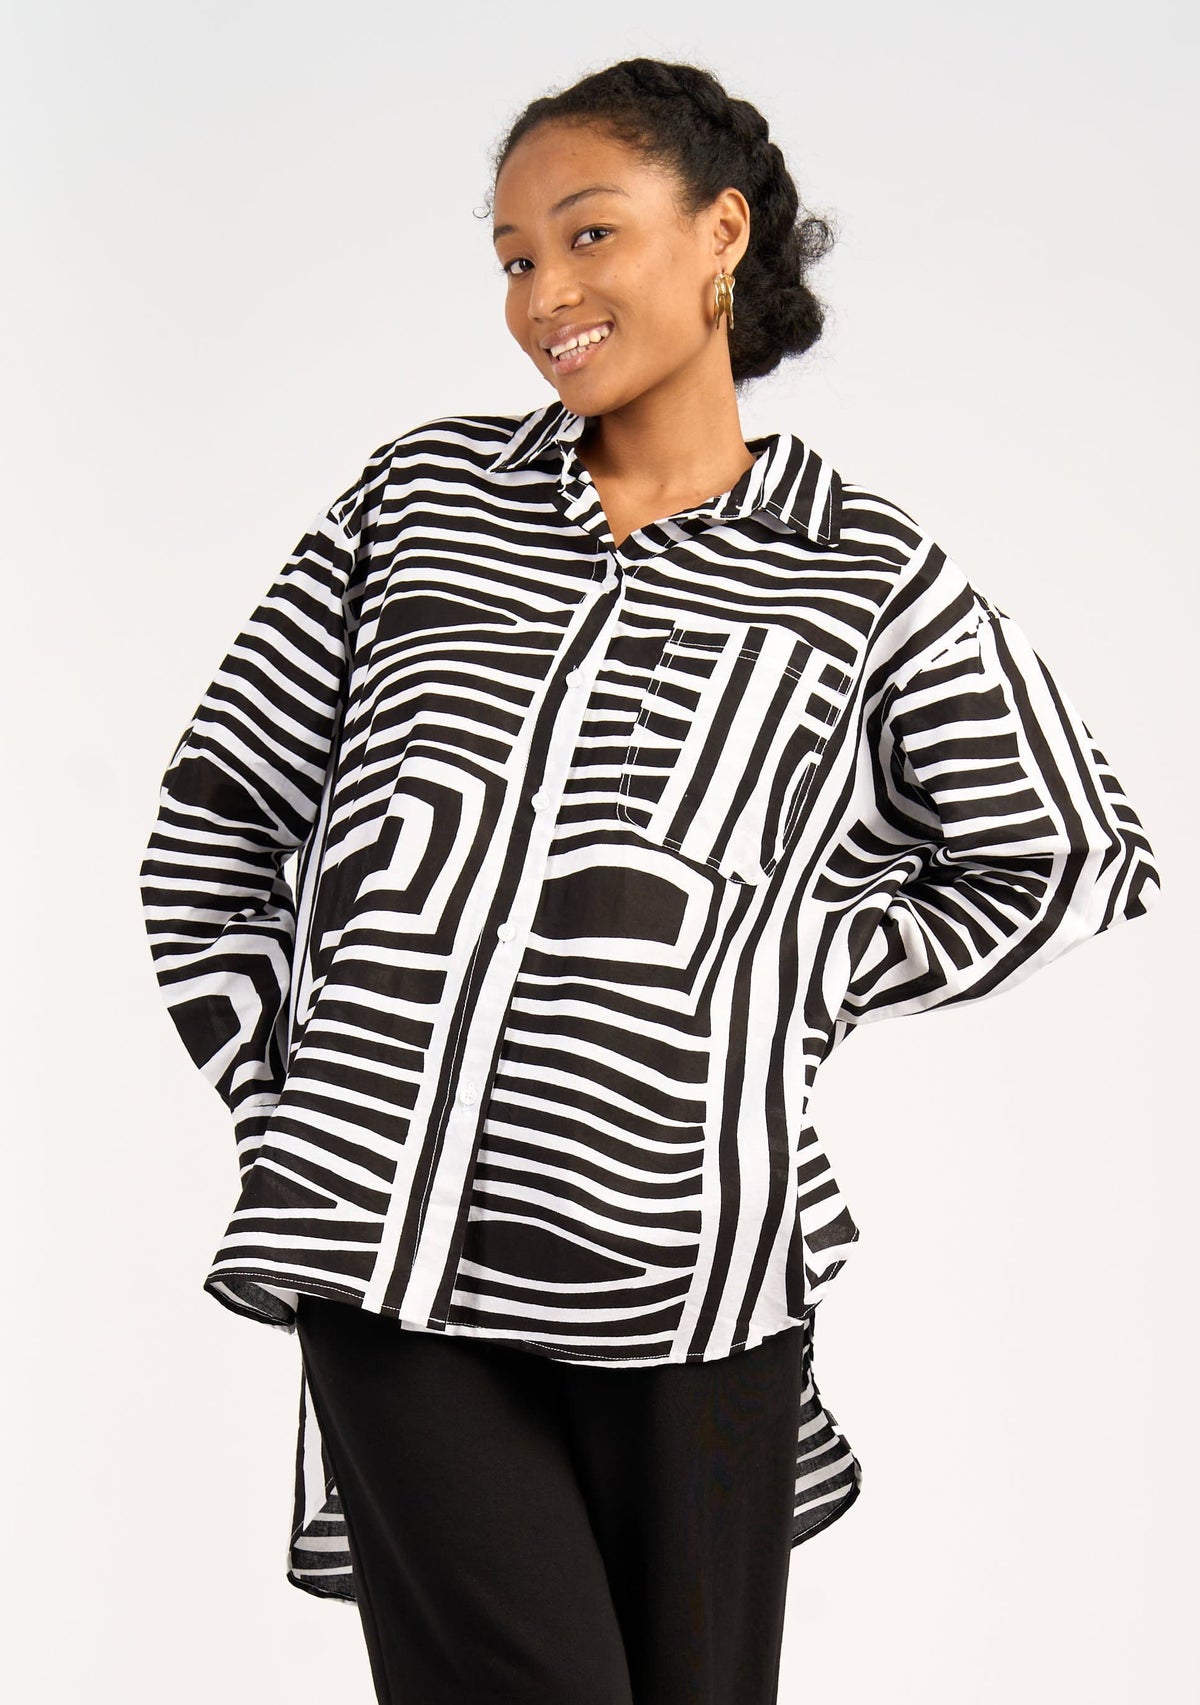 YEVU | Women's Socially Responsible African Print Clothing – Page 3